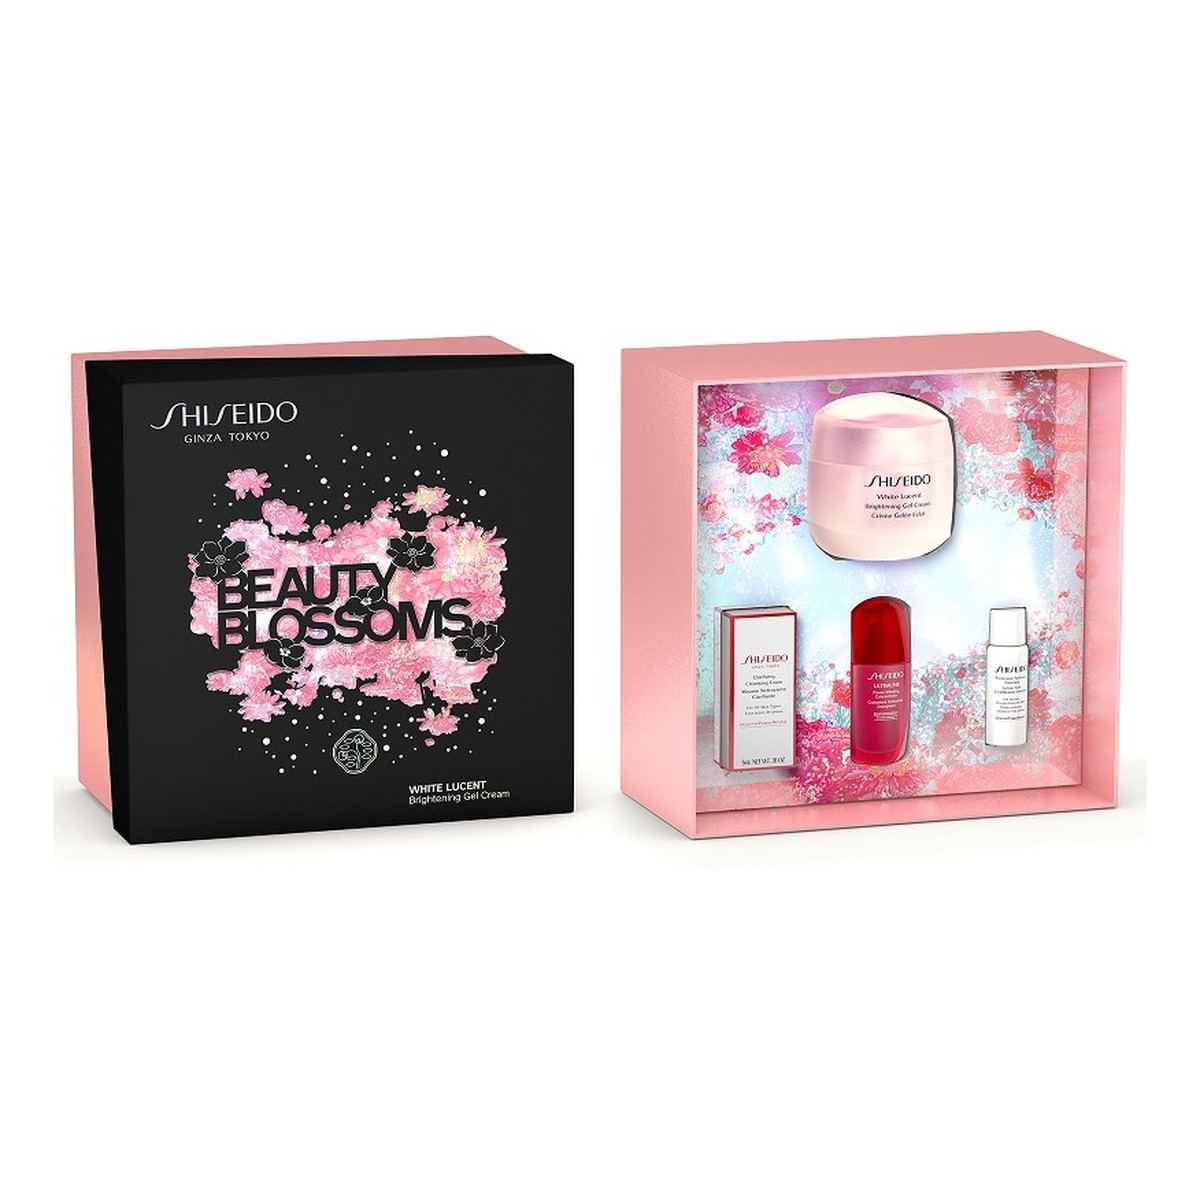 Shiseido Beauty Blossoms Zestaw white lucent brightening gel cream 50ml + clarifying cleansing foam 5ml + trearment siftener enriched 7ml + power infusing concentrate 10ml